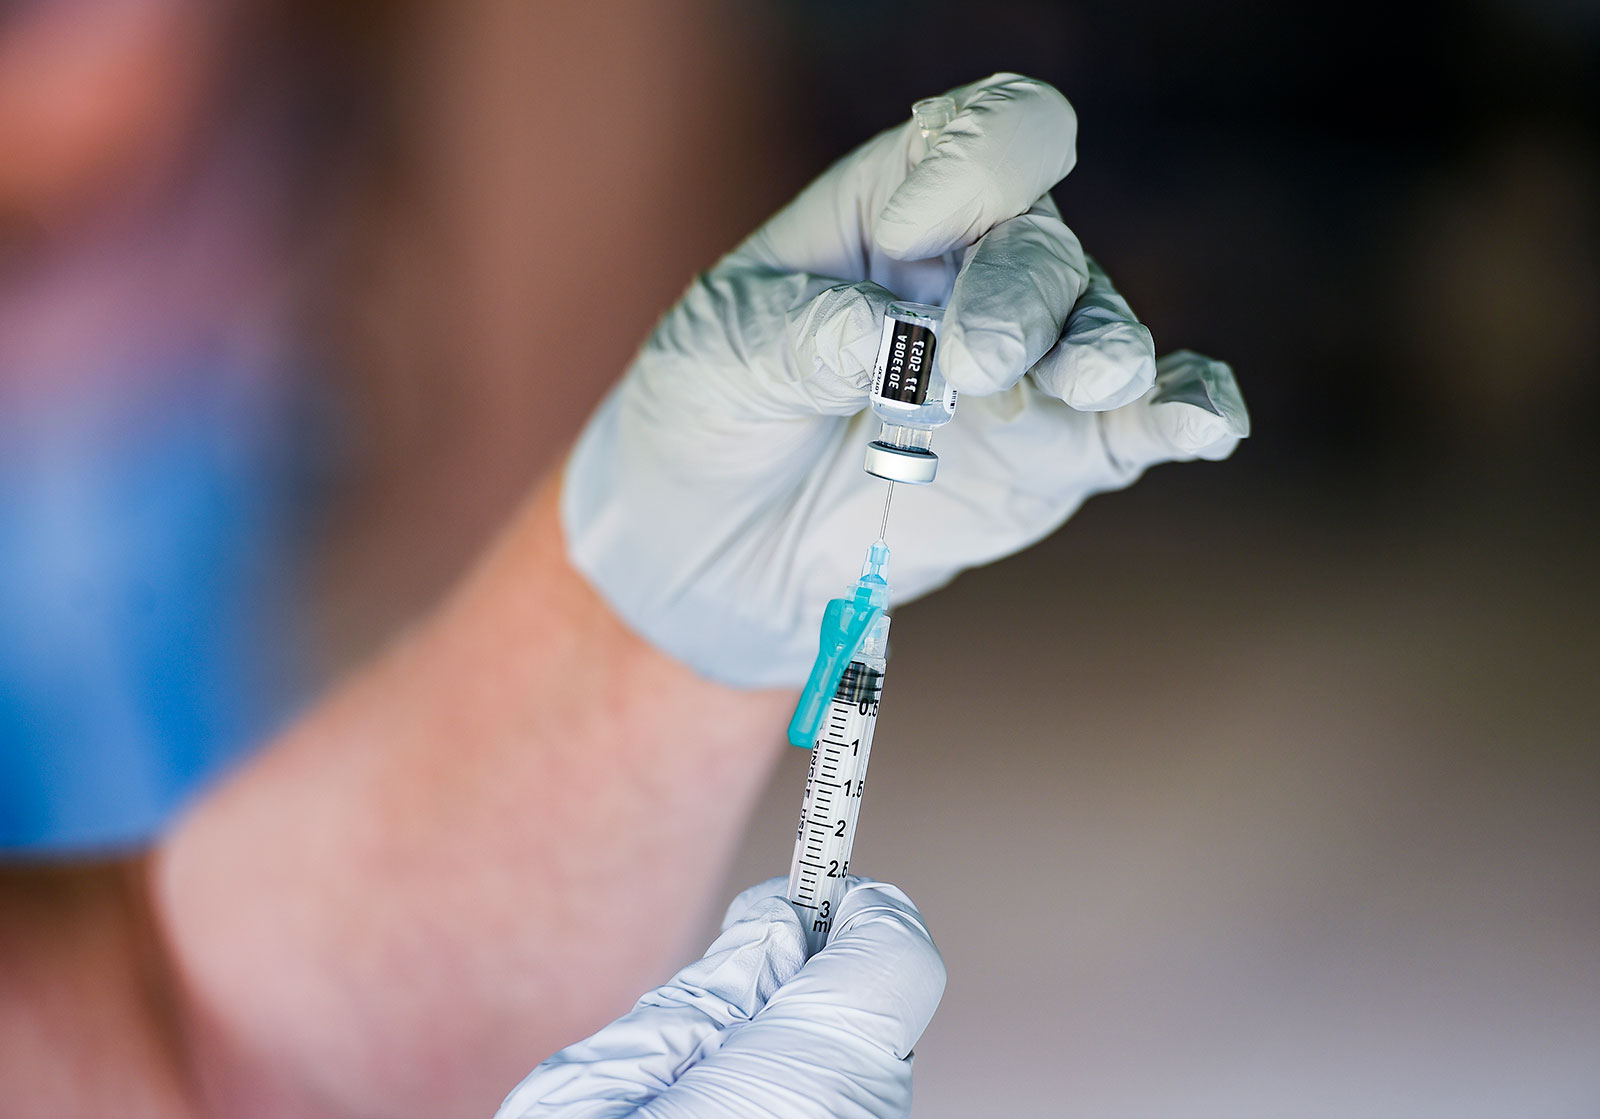 A nurse fills a syringe with a dose of the Pfizer/BioNTech vaccine on September 14 in Reading, Pennsylvania.